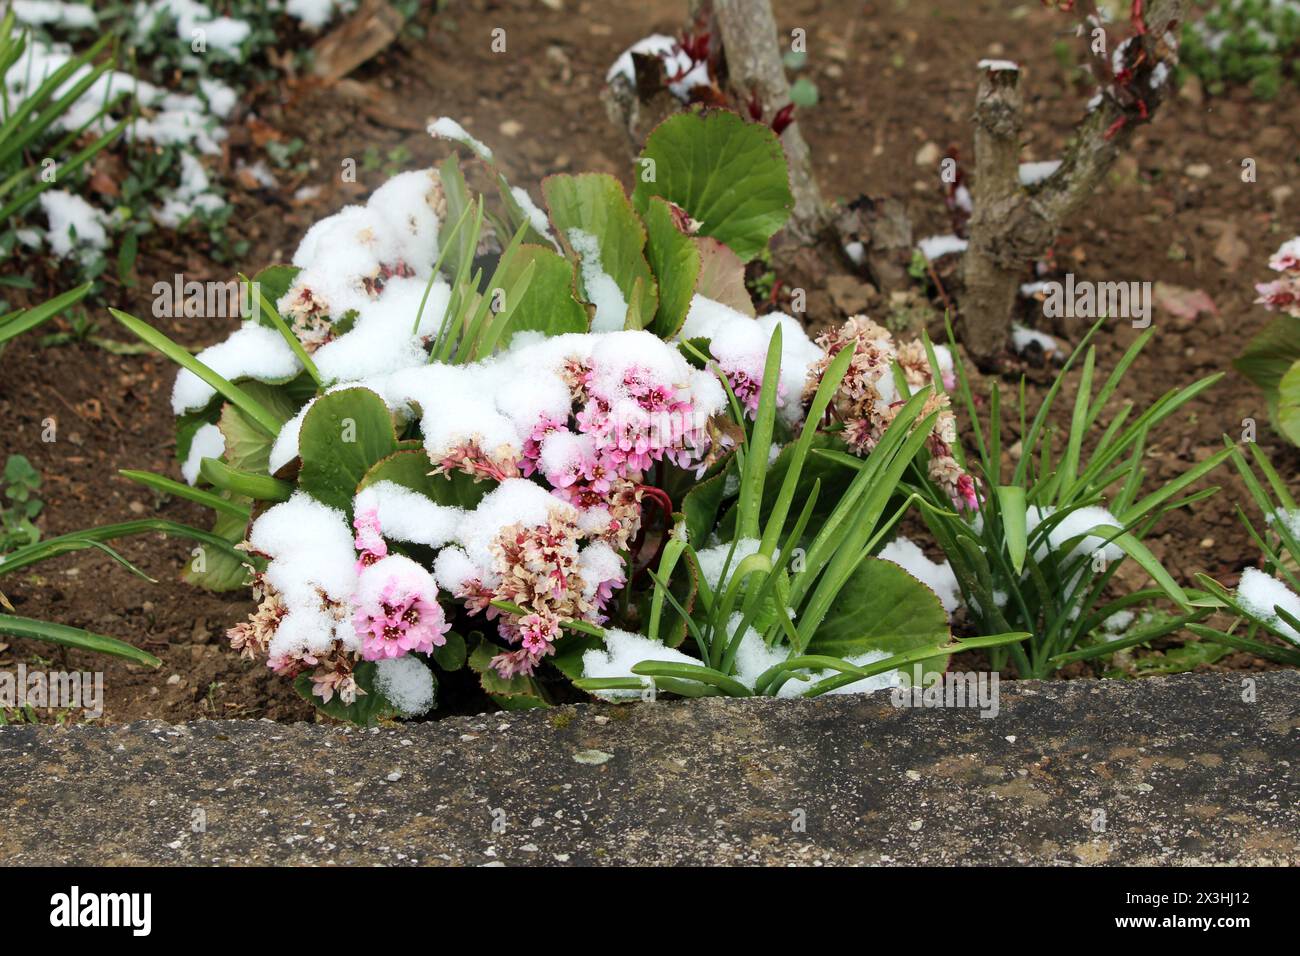 Snow covered Bergenia or Elephant eared saxifrage or Elephants ears rhizomatous evergreen perennial flowering plants with dense bunch of open blooming Stock Photo